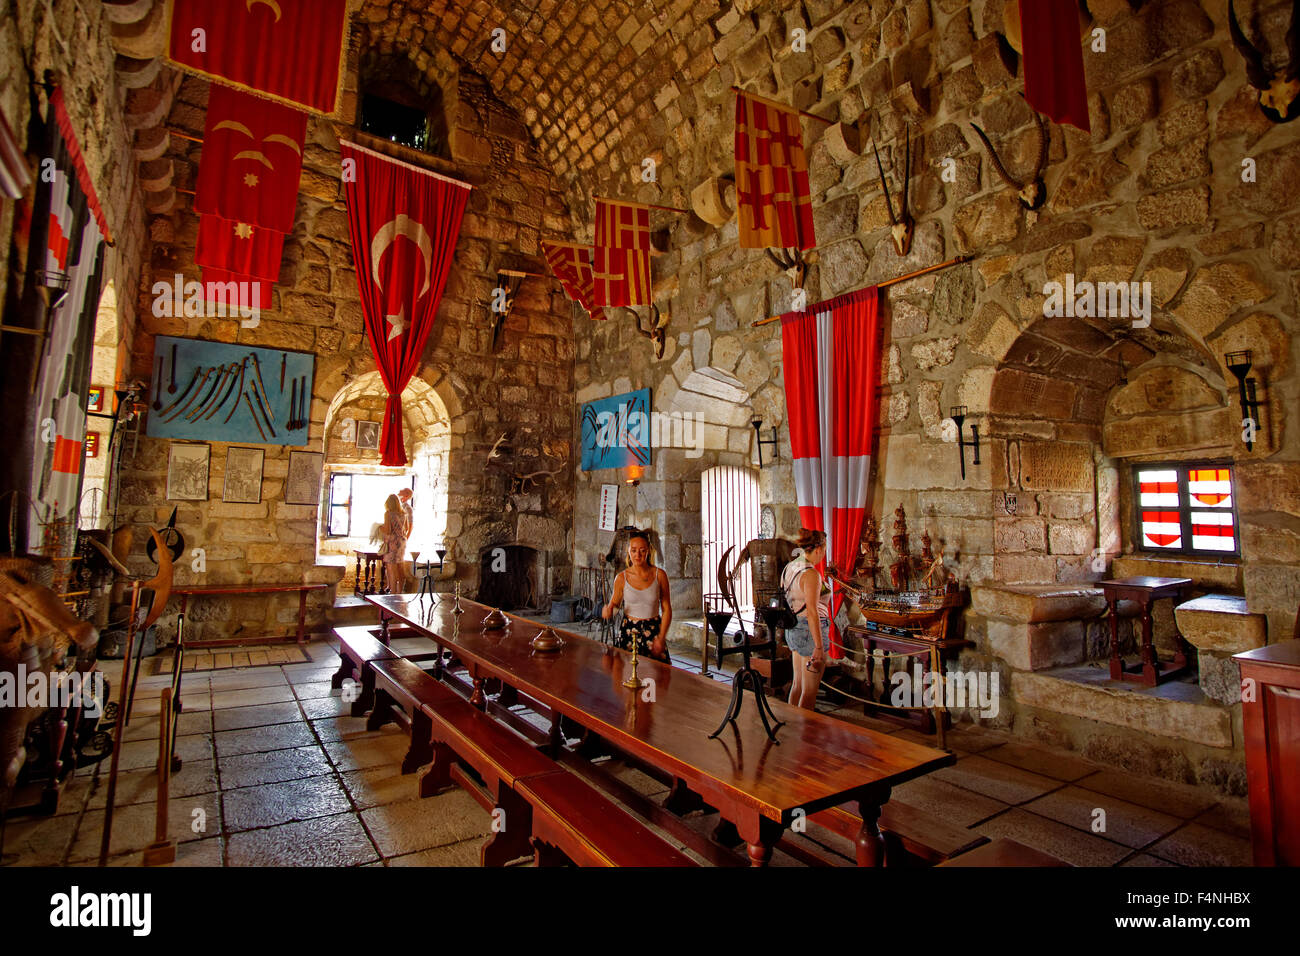 Interior of the English Tower at the castle of St. Peter's, Bodrum, Mugla, Turkey. The tower was home to the English crusaders. Stock Photo